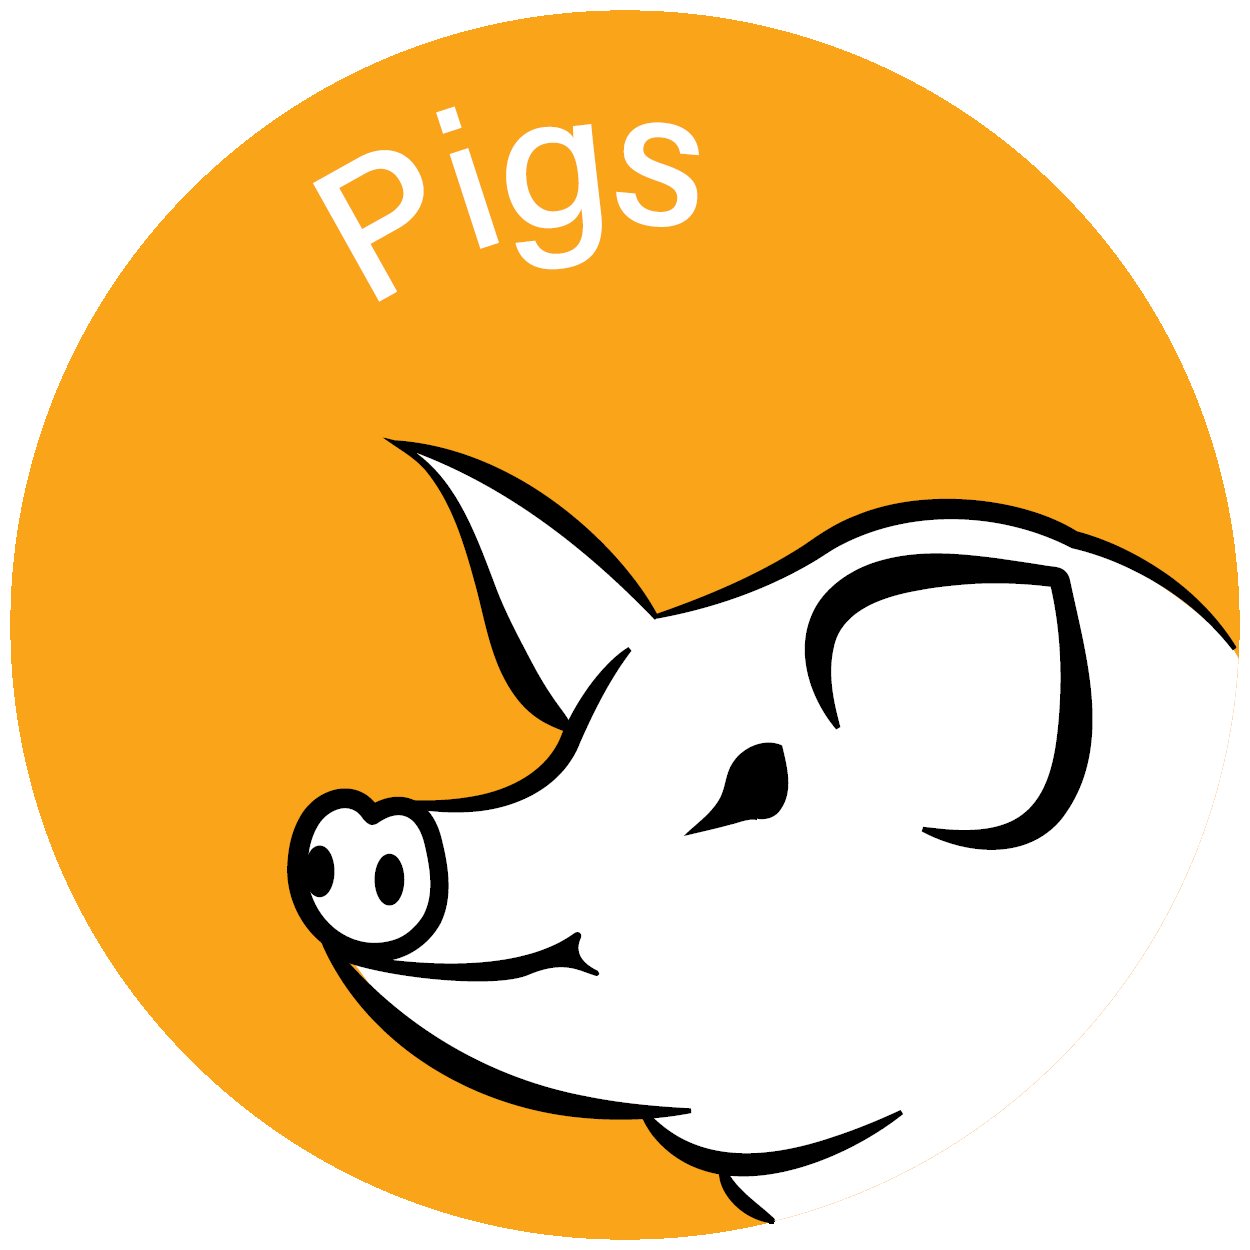 Pig products